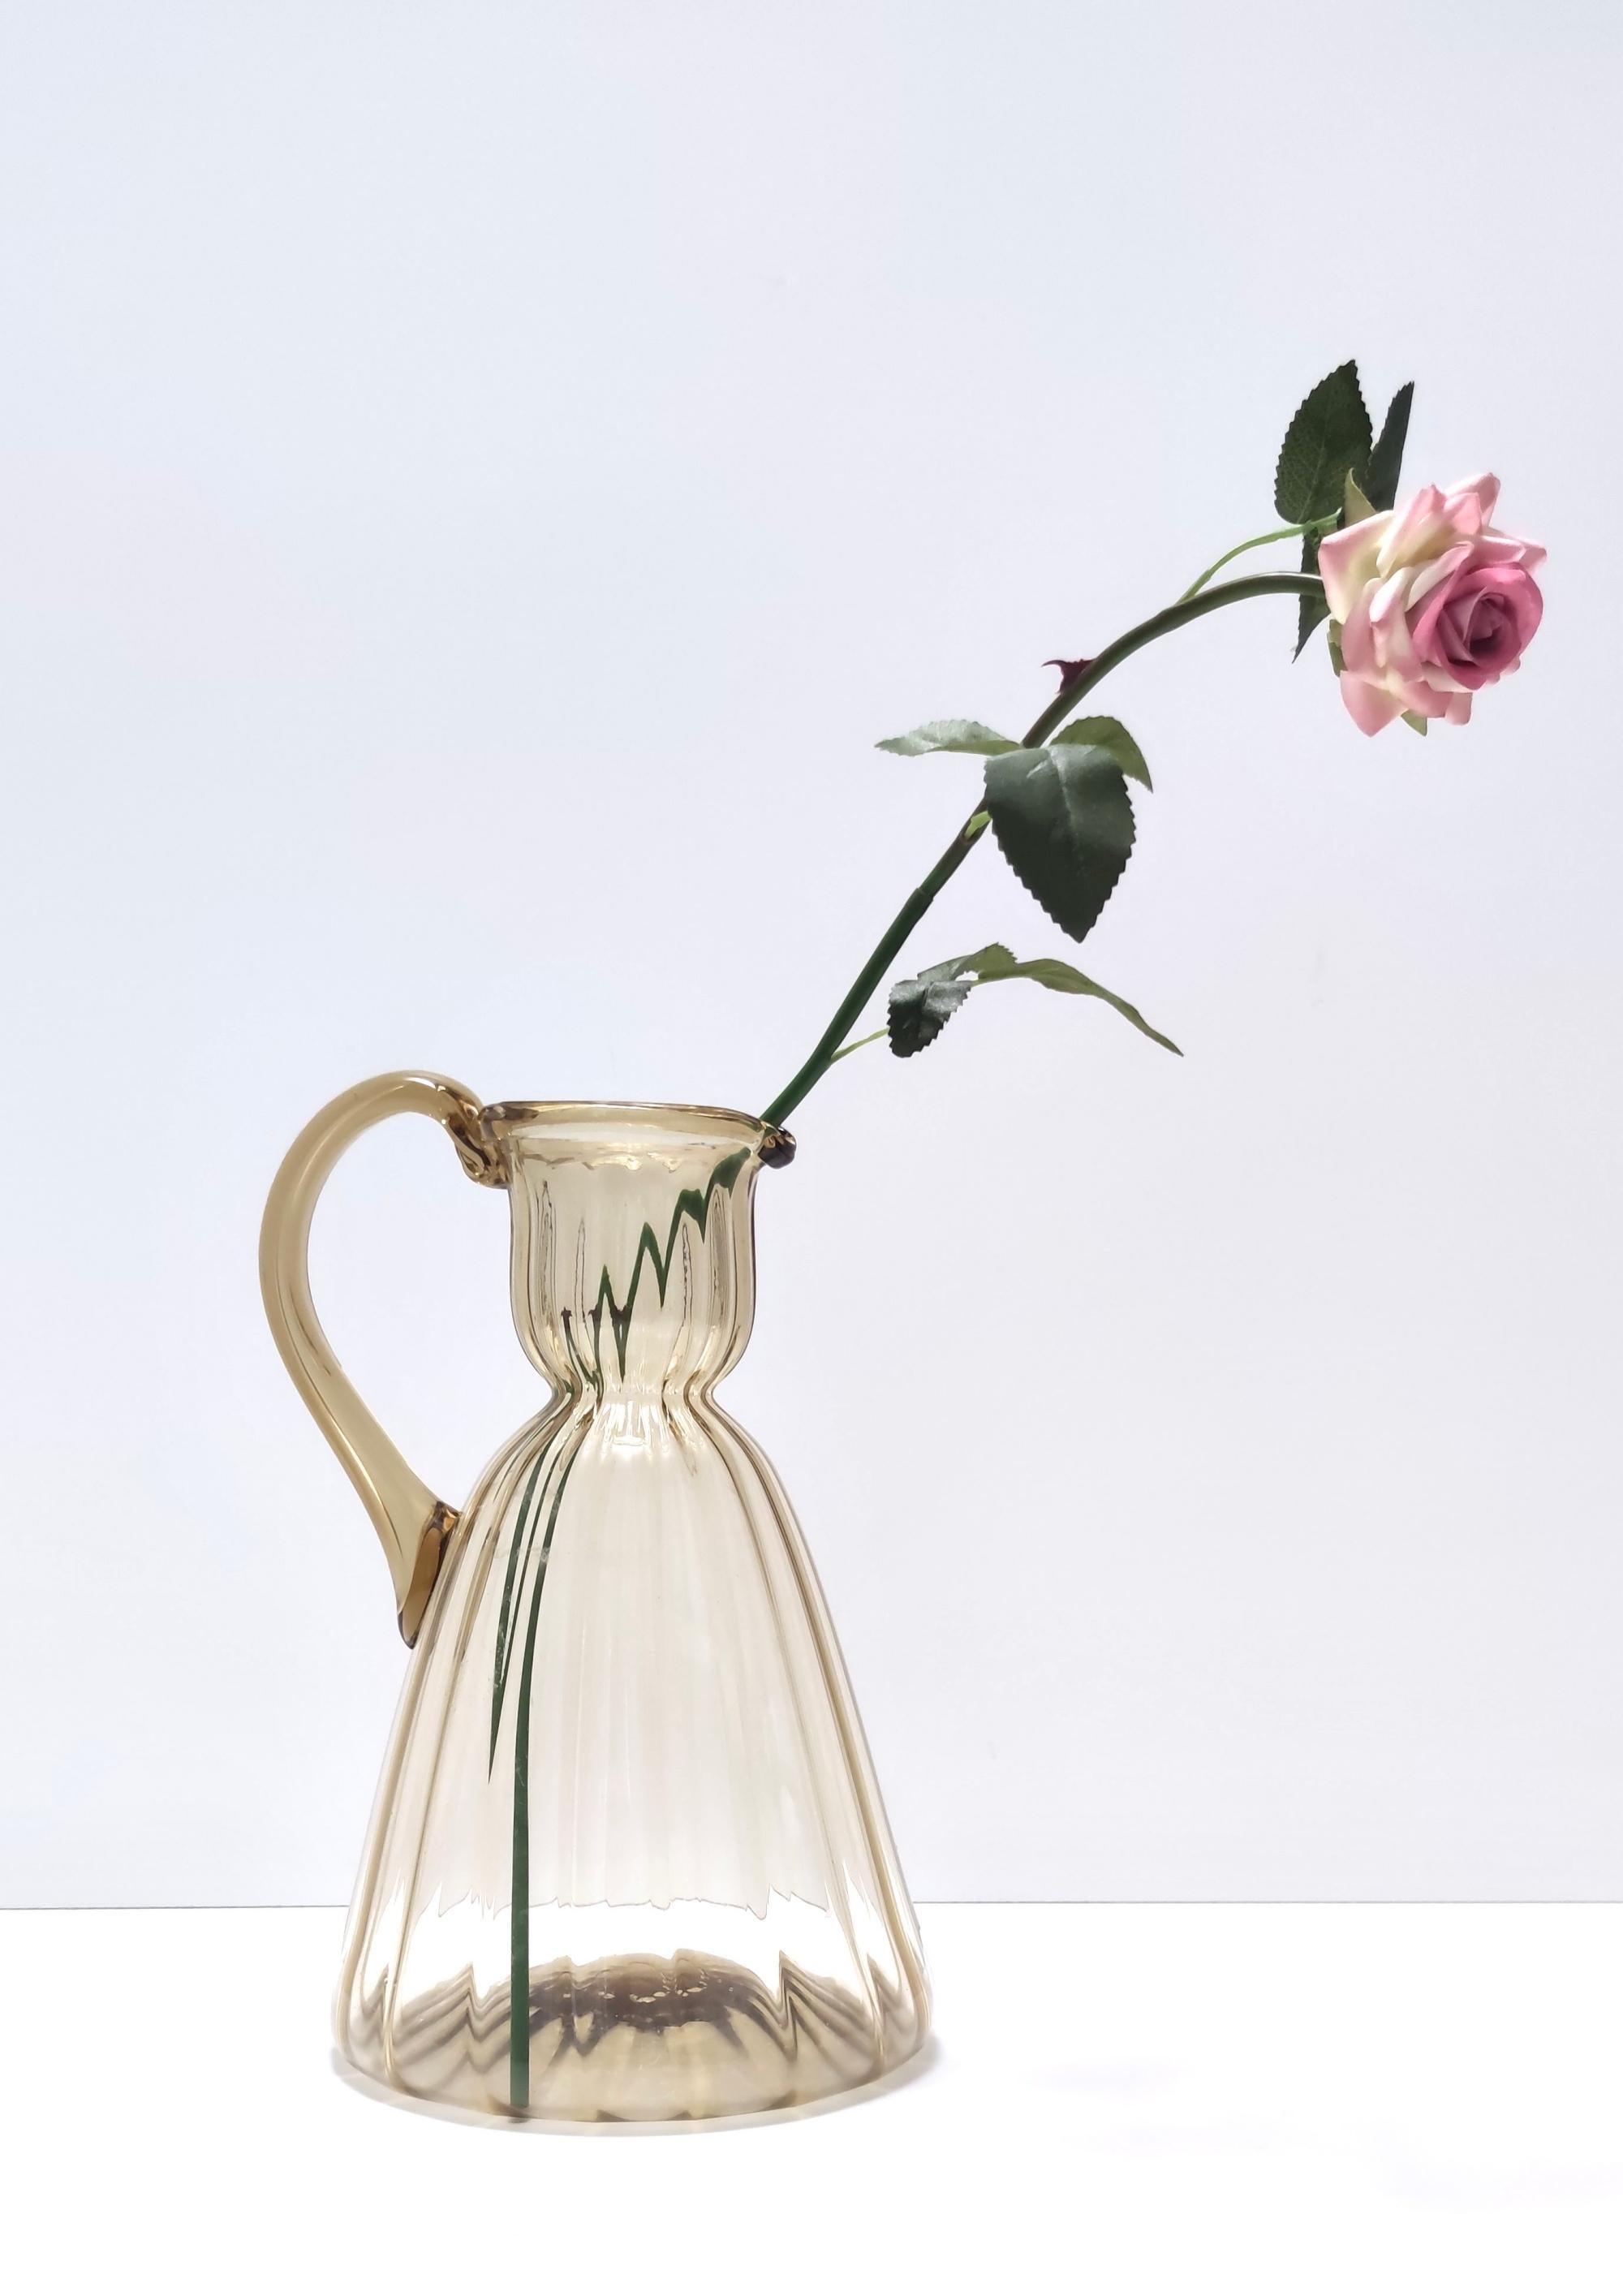 Made in Italy, 1920s.
This pitcher vase is made in straw-colored glass. 
It is a vintage piece, therefore it might show slight traces of use, but it can be considered as in perfect original condition and ready to become a piece in a home.